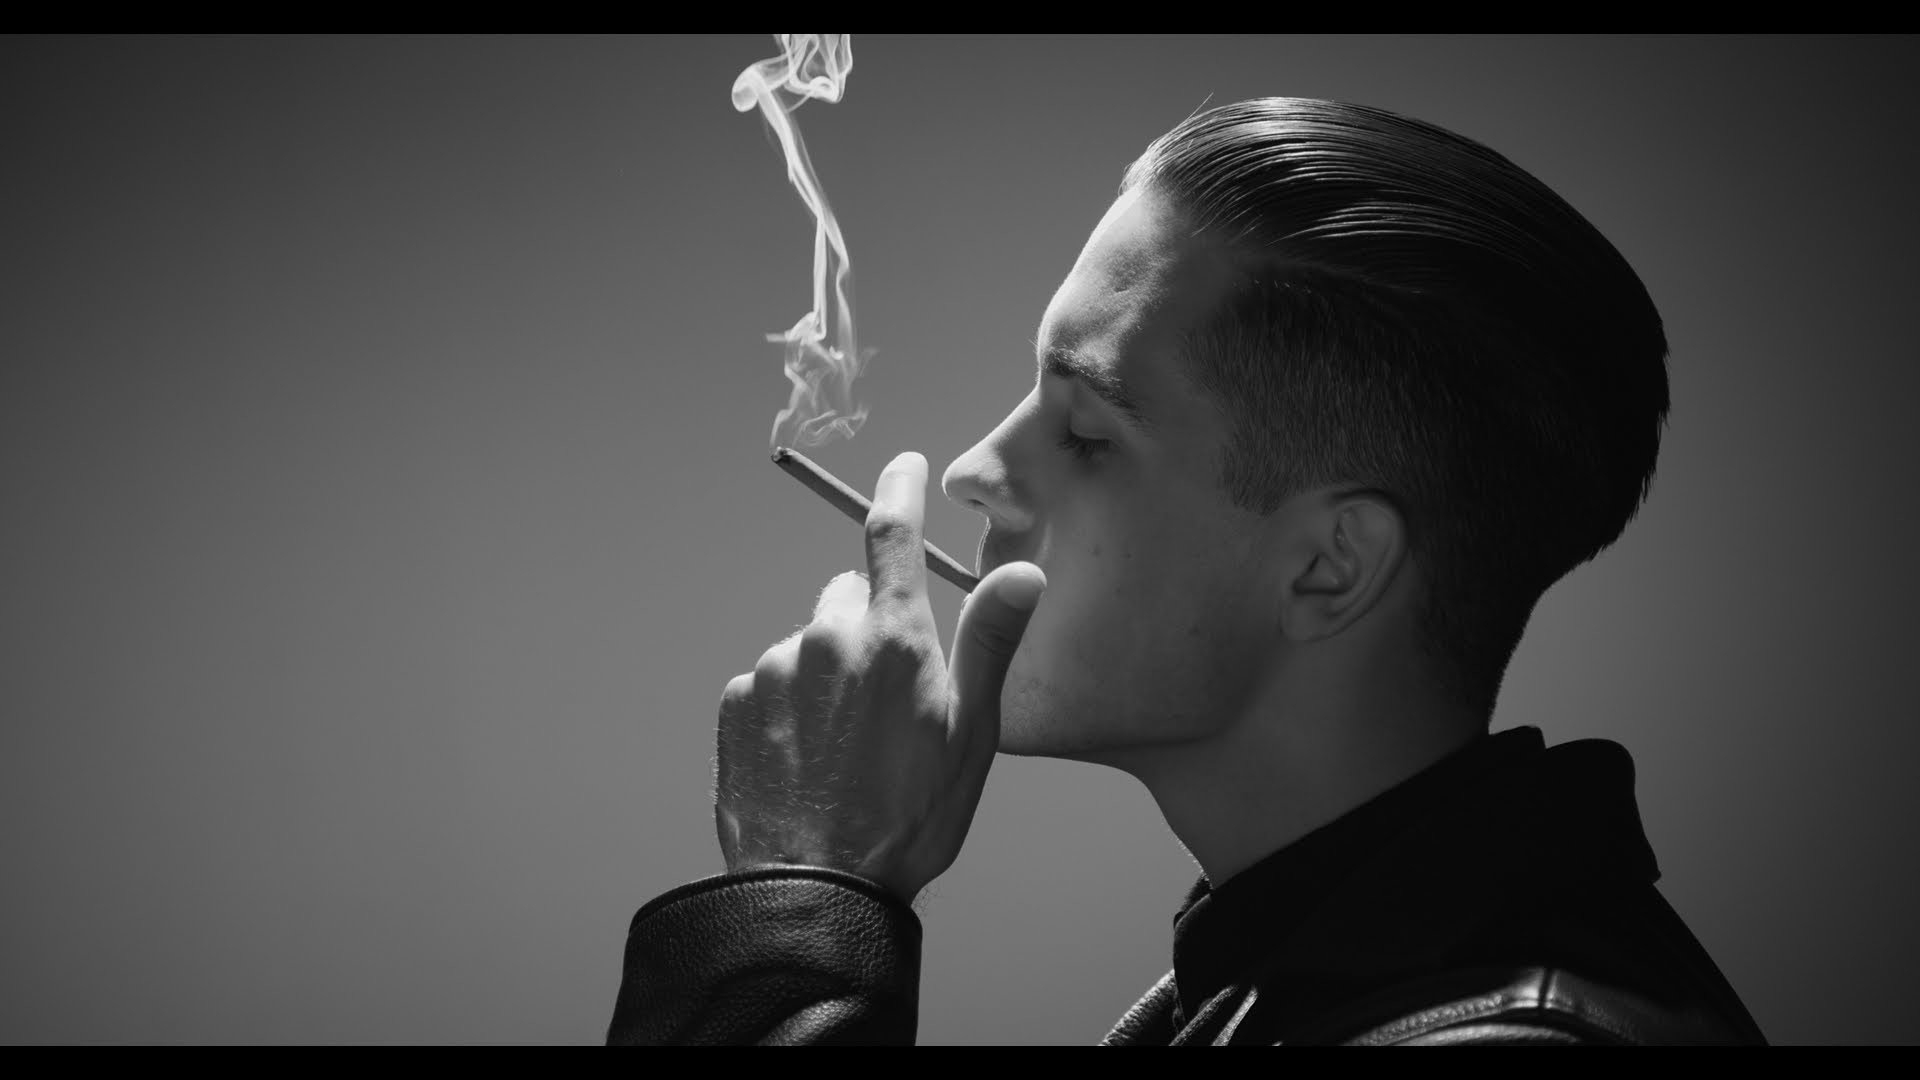 For this new version of Far Alone, G Eazy adds another fellow